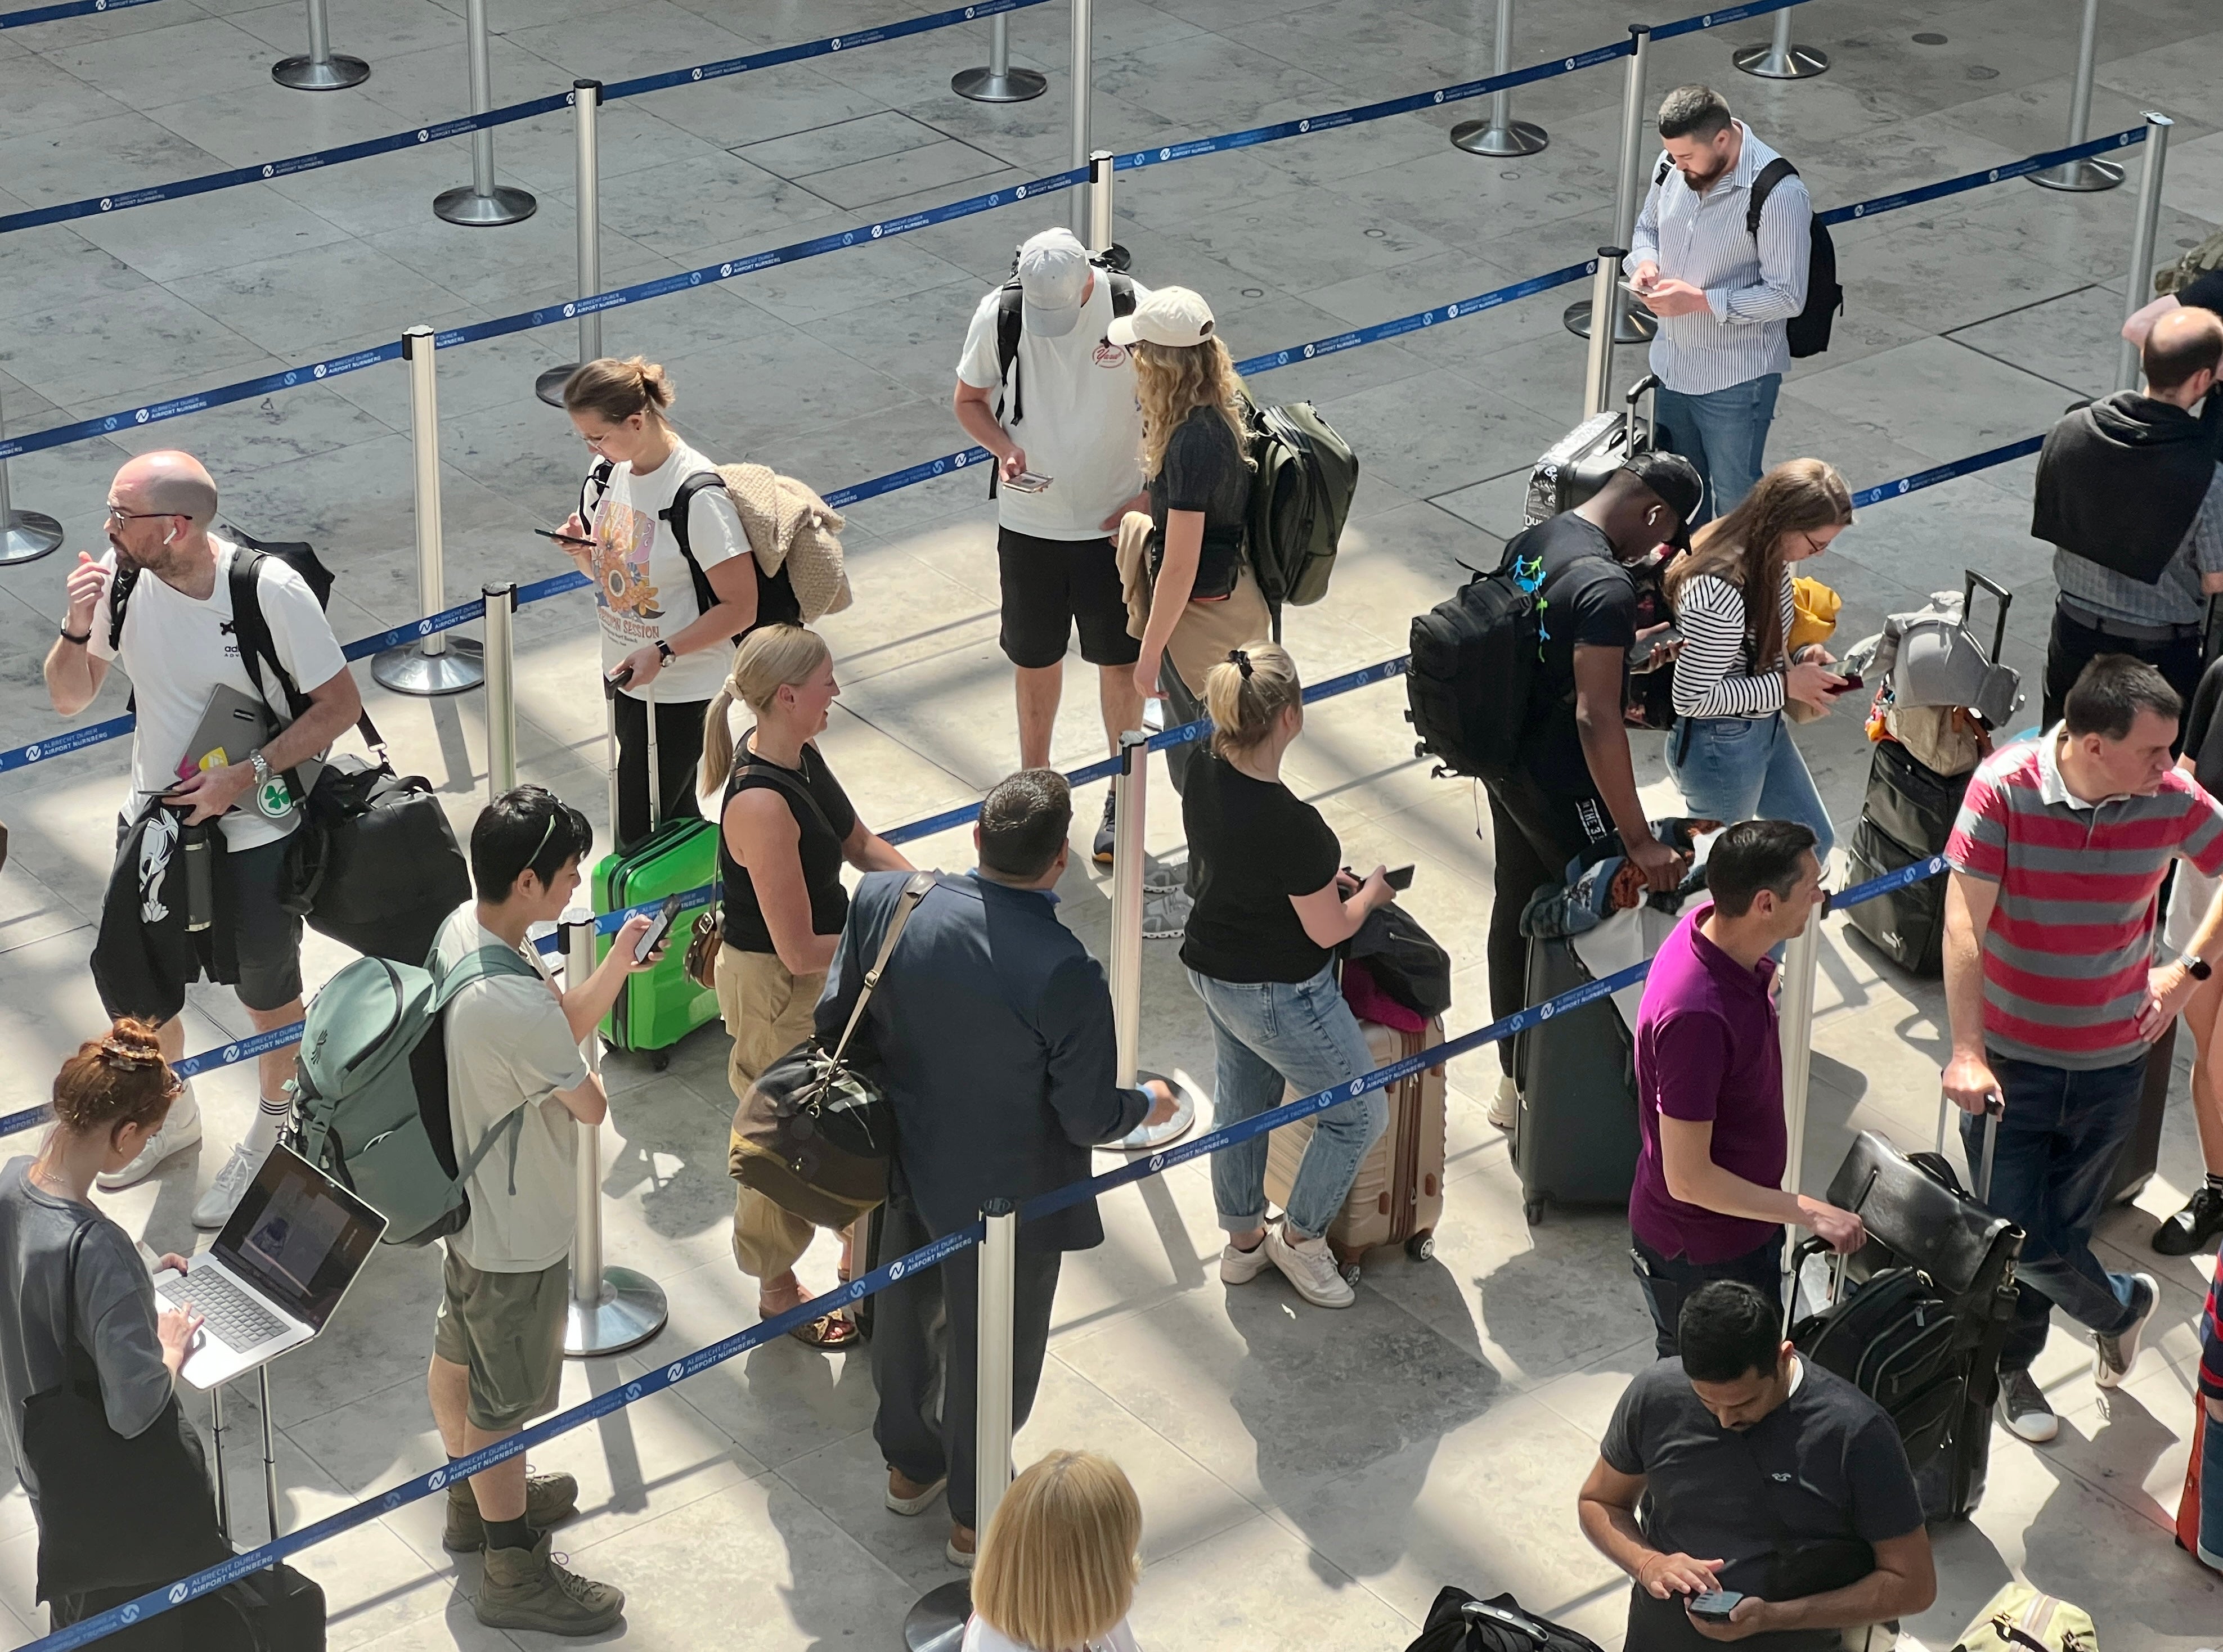 Distance learning: Queues are an unavoidable part of the airport experience